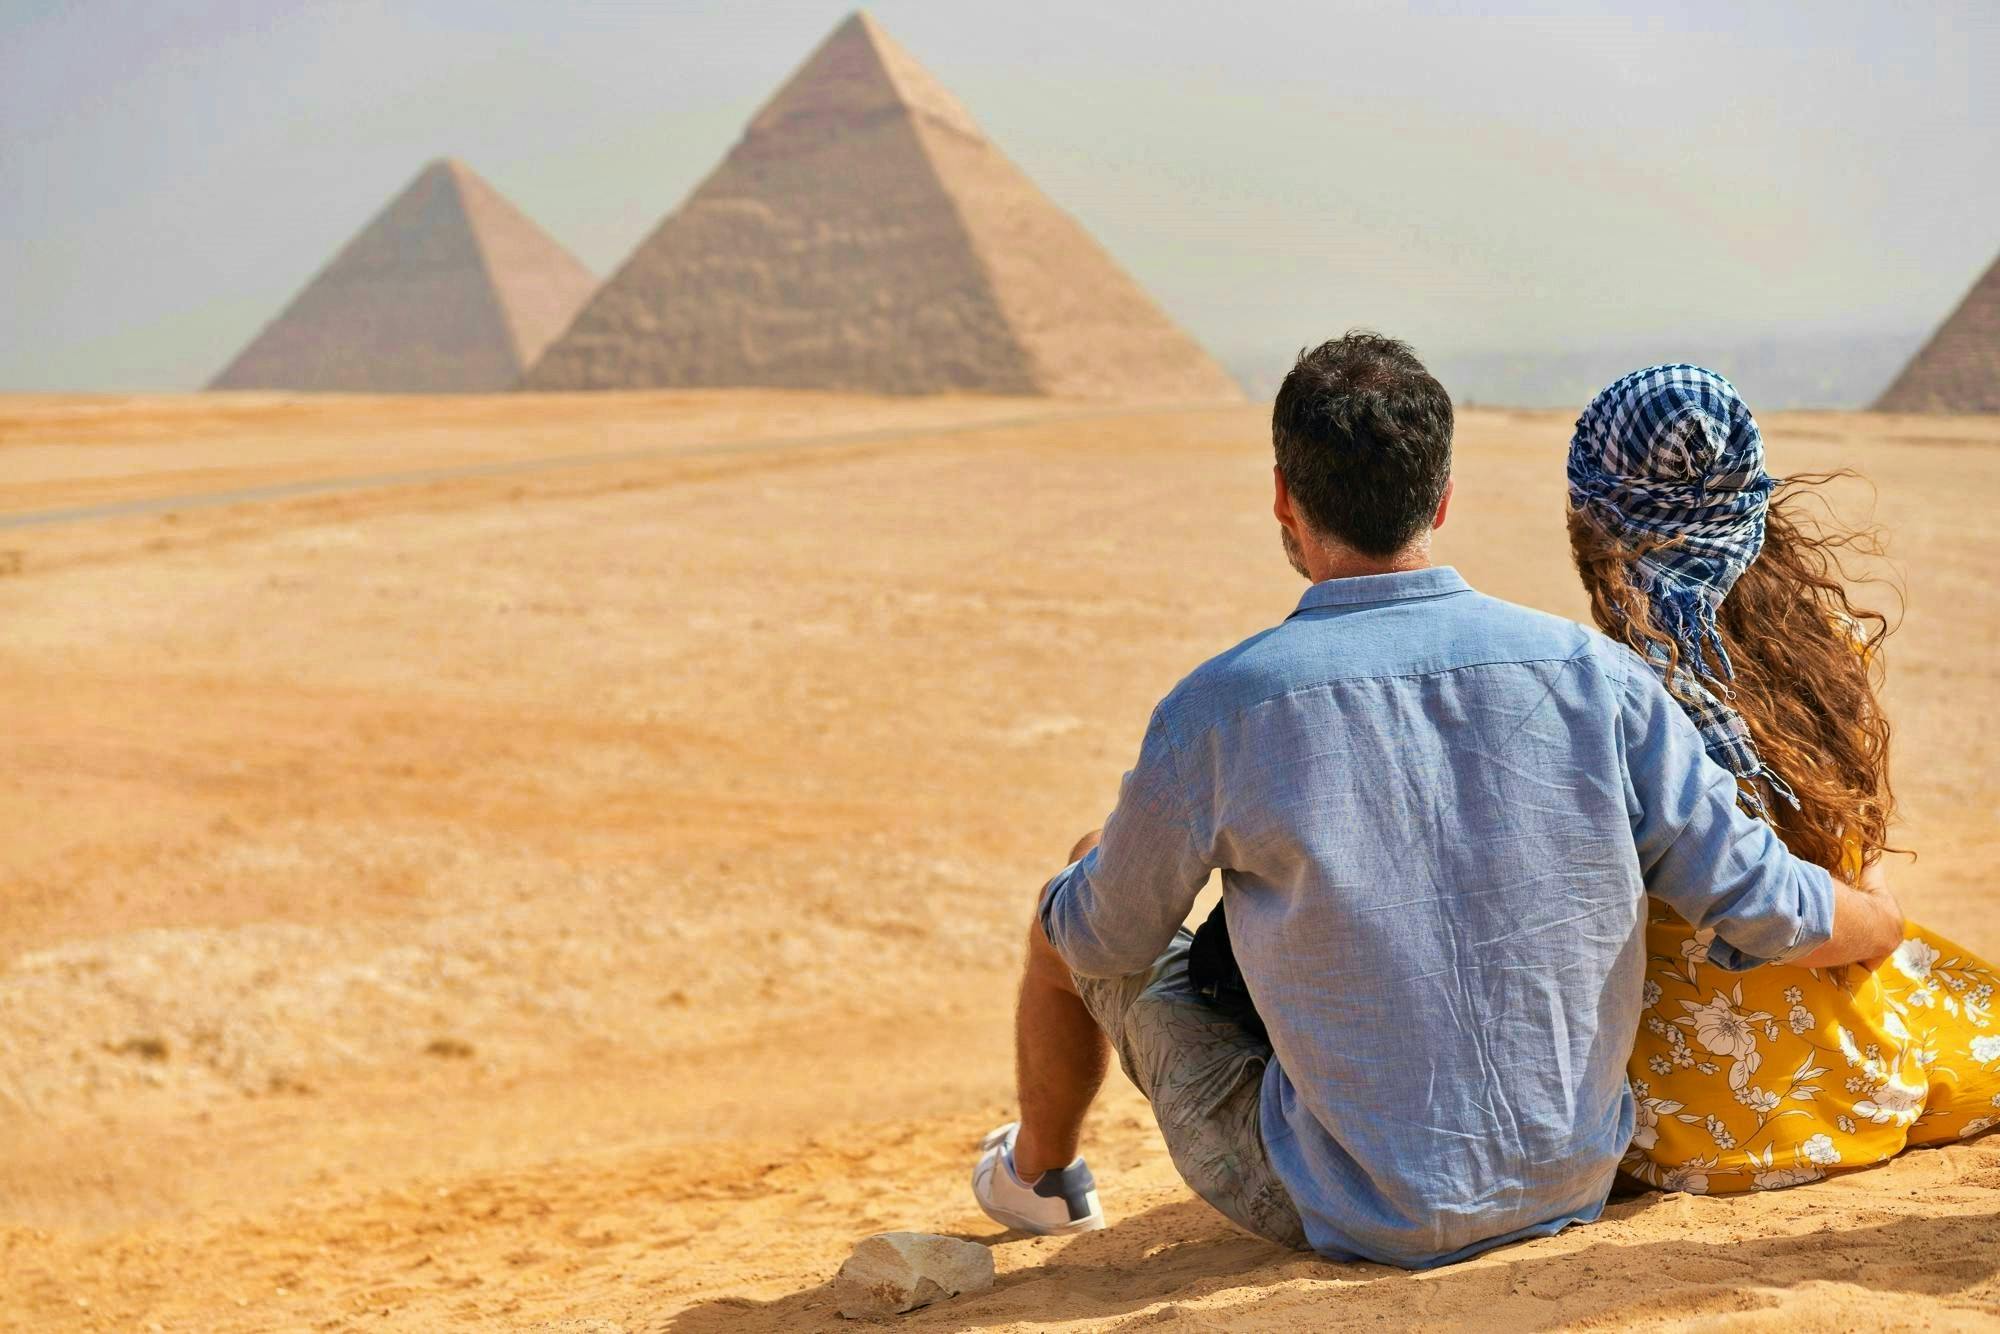 Cairo day trip from Sharm El Sheikh including flights Musement